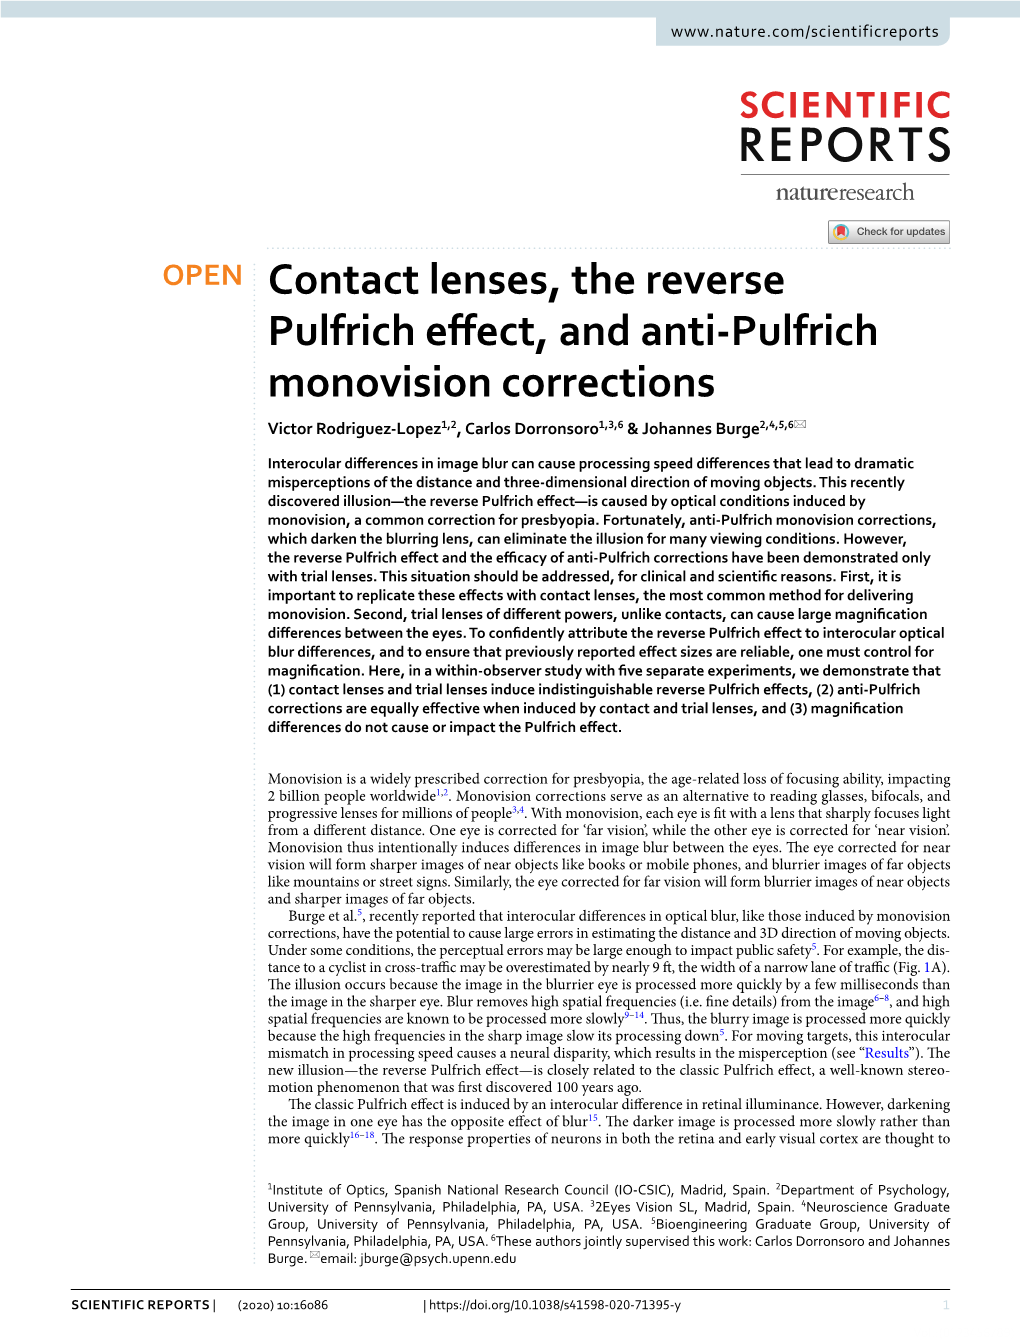 Contact Lenses, the Reverse Pulfrich Effect, and Anti‑Pulfrich Monovision